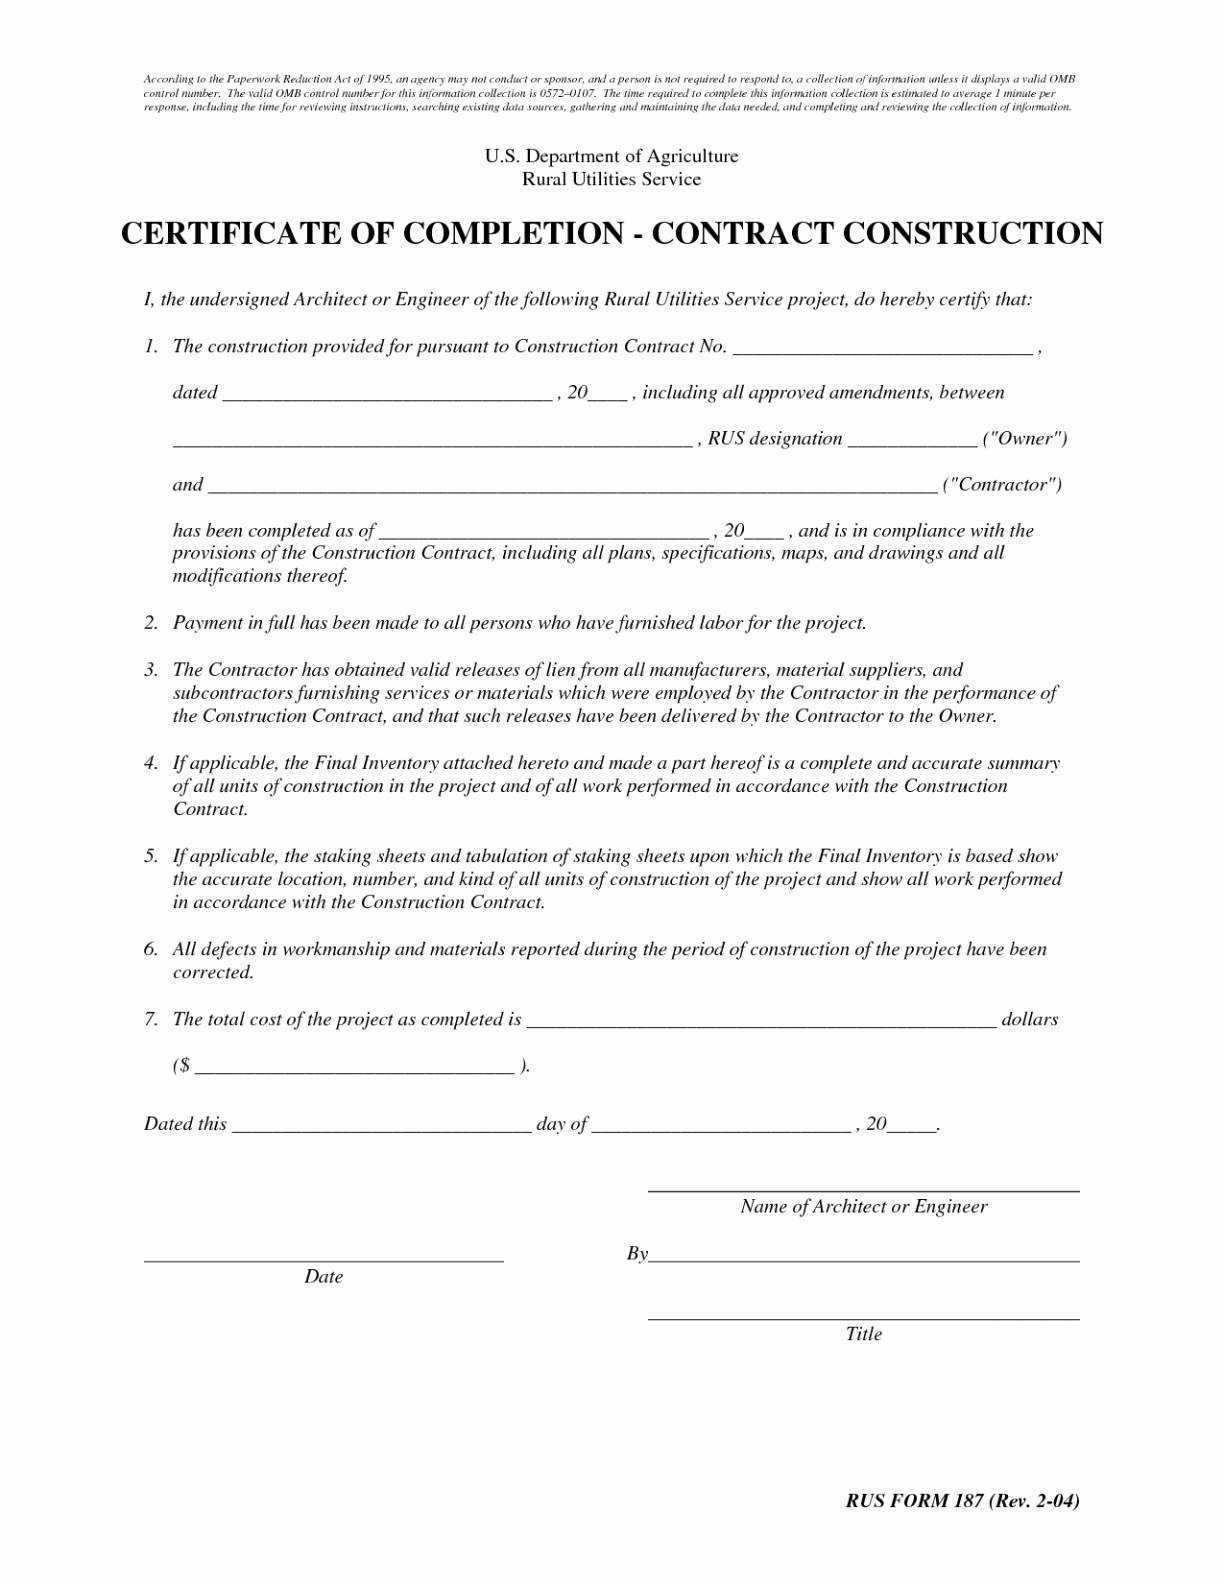 Sample Of Certificate Of Completion Of Construction Project With Regard To Practical Completion Certificate Template Jct